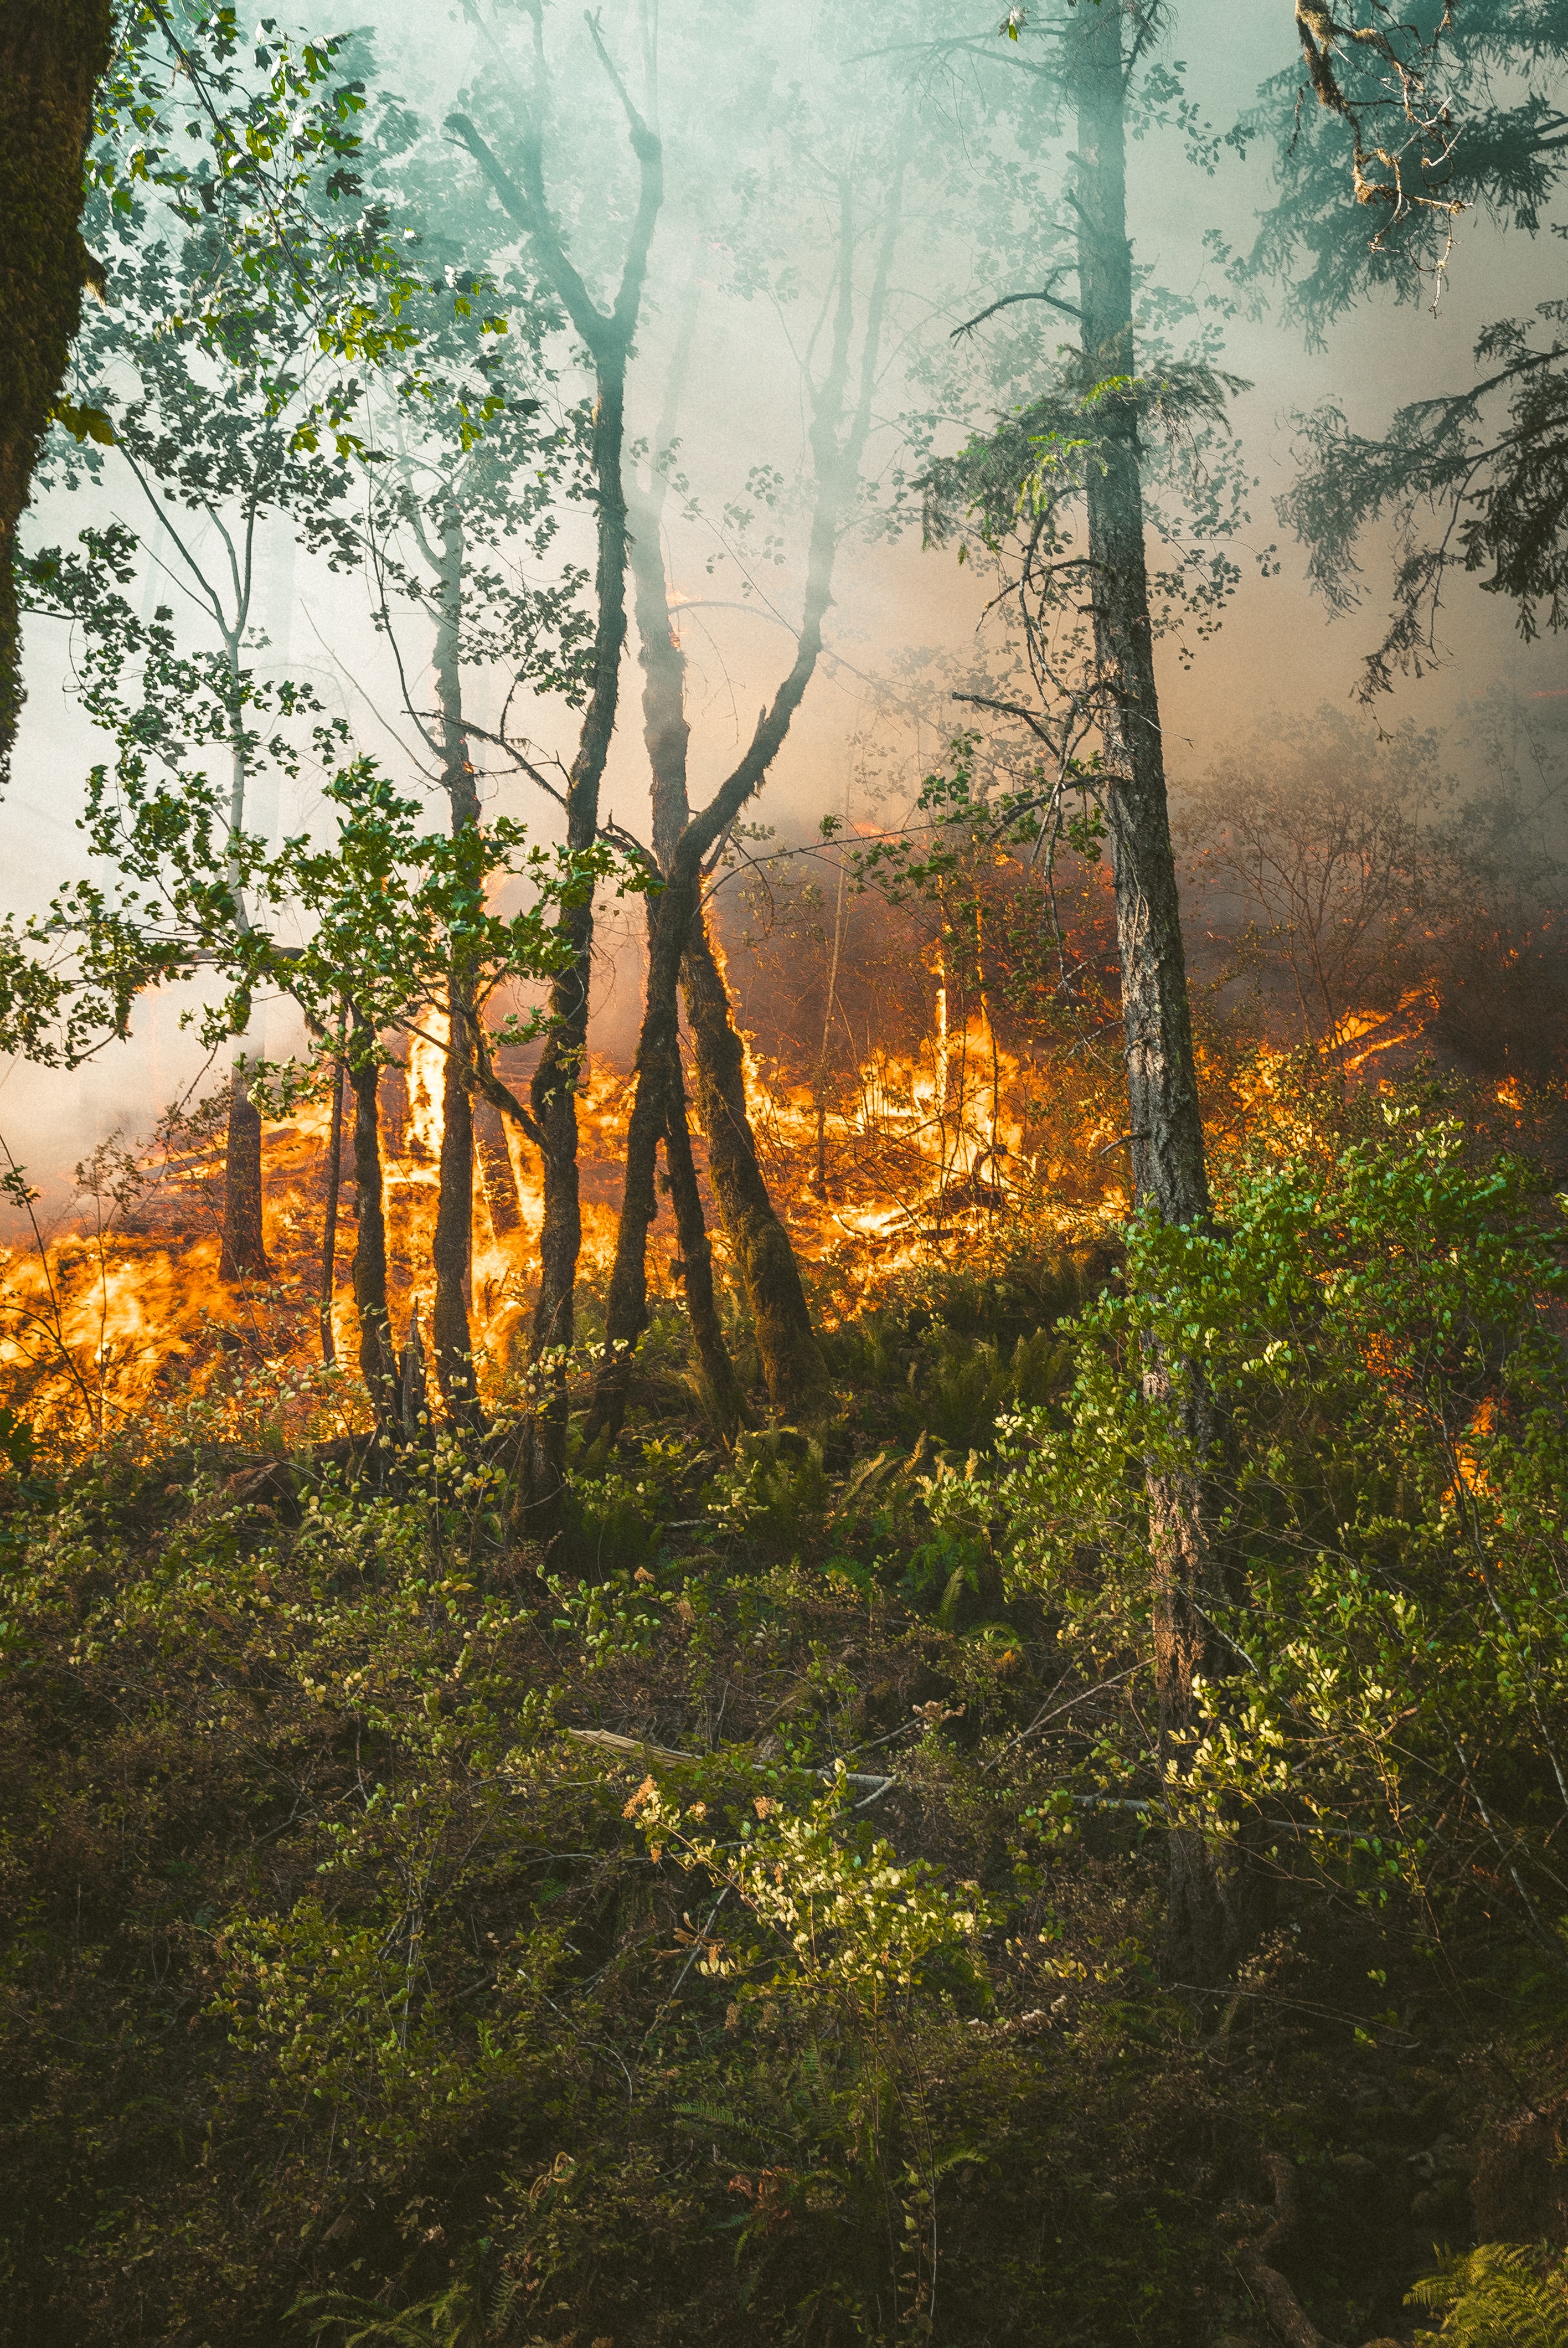 FirEUrisk: PIK joins EU project to analyze and manage wildfires